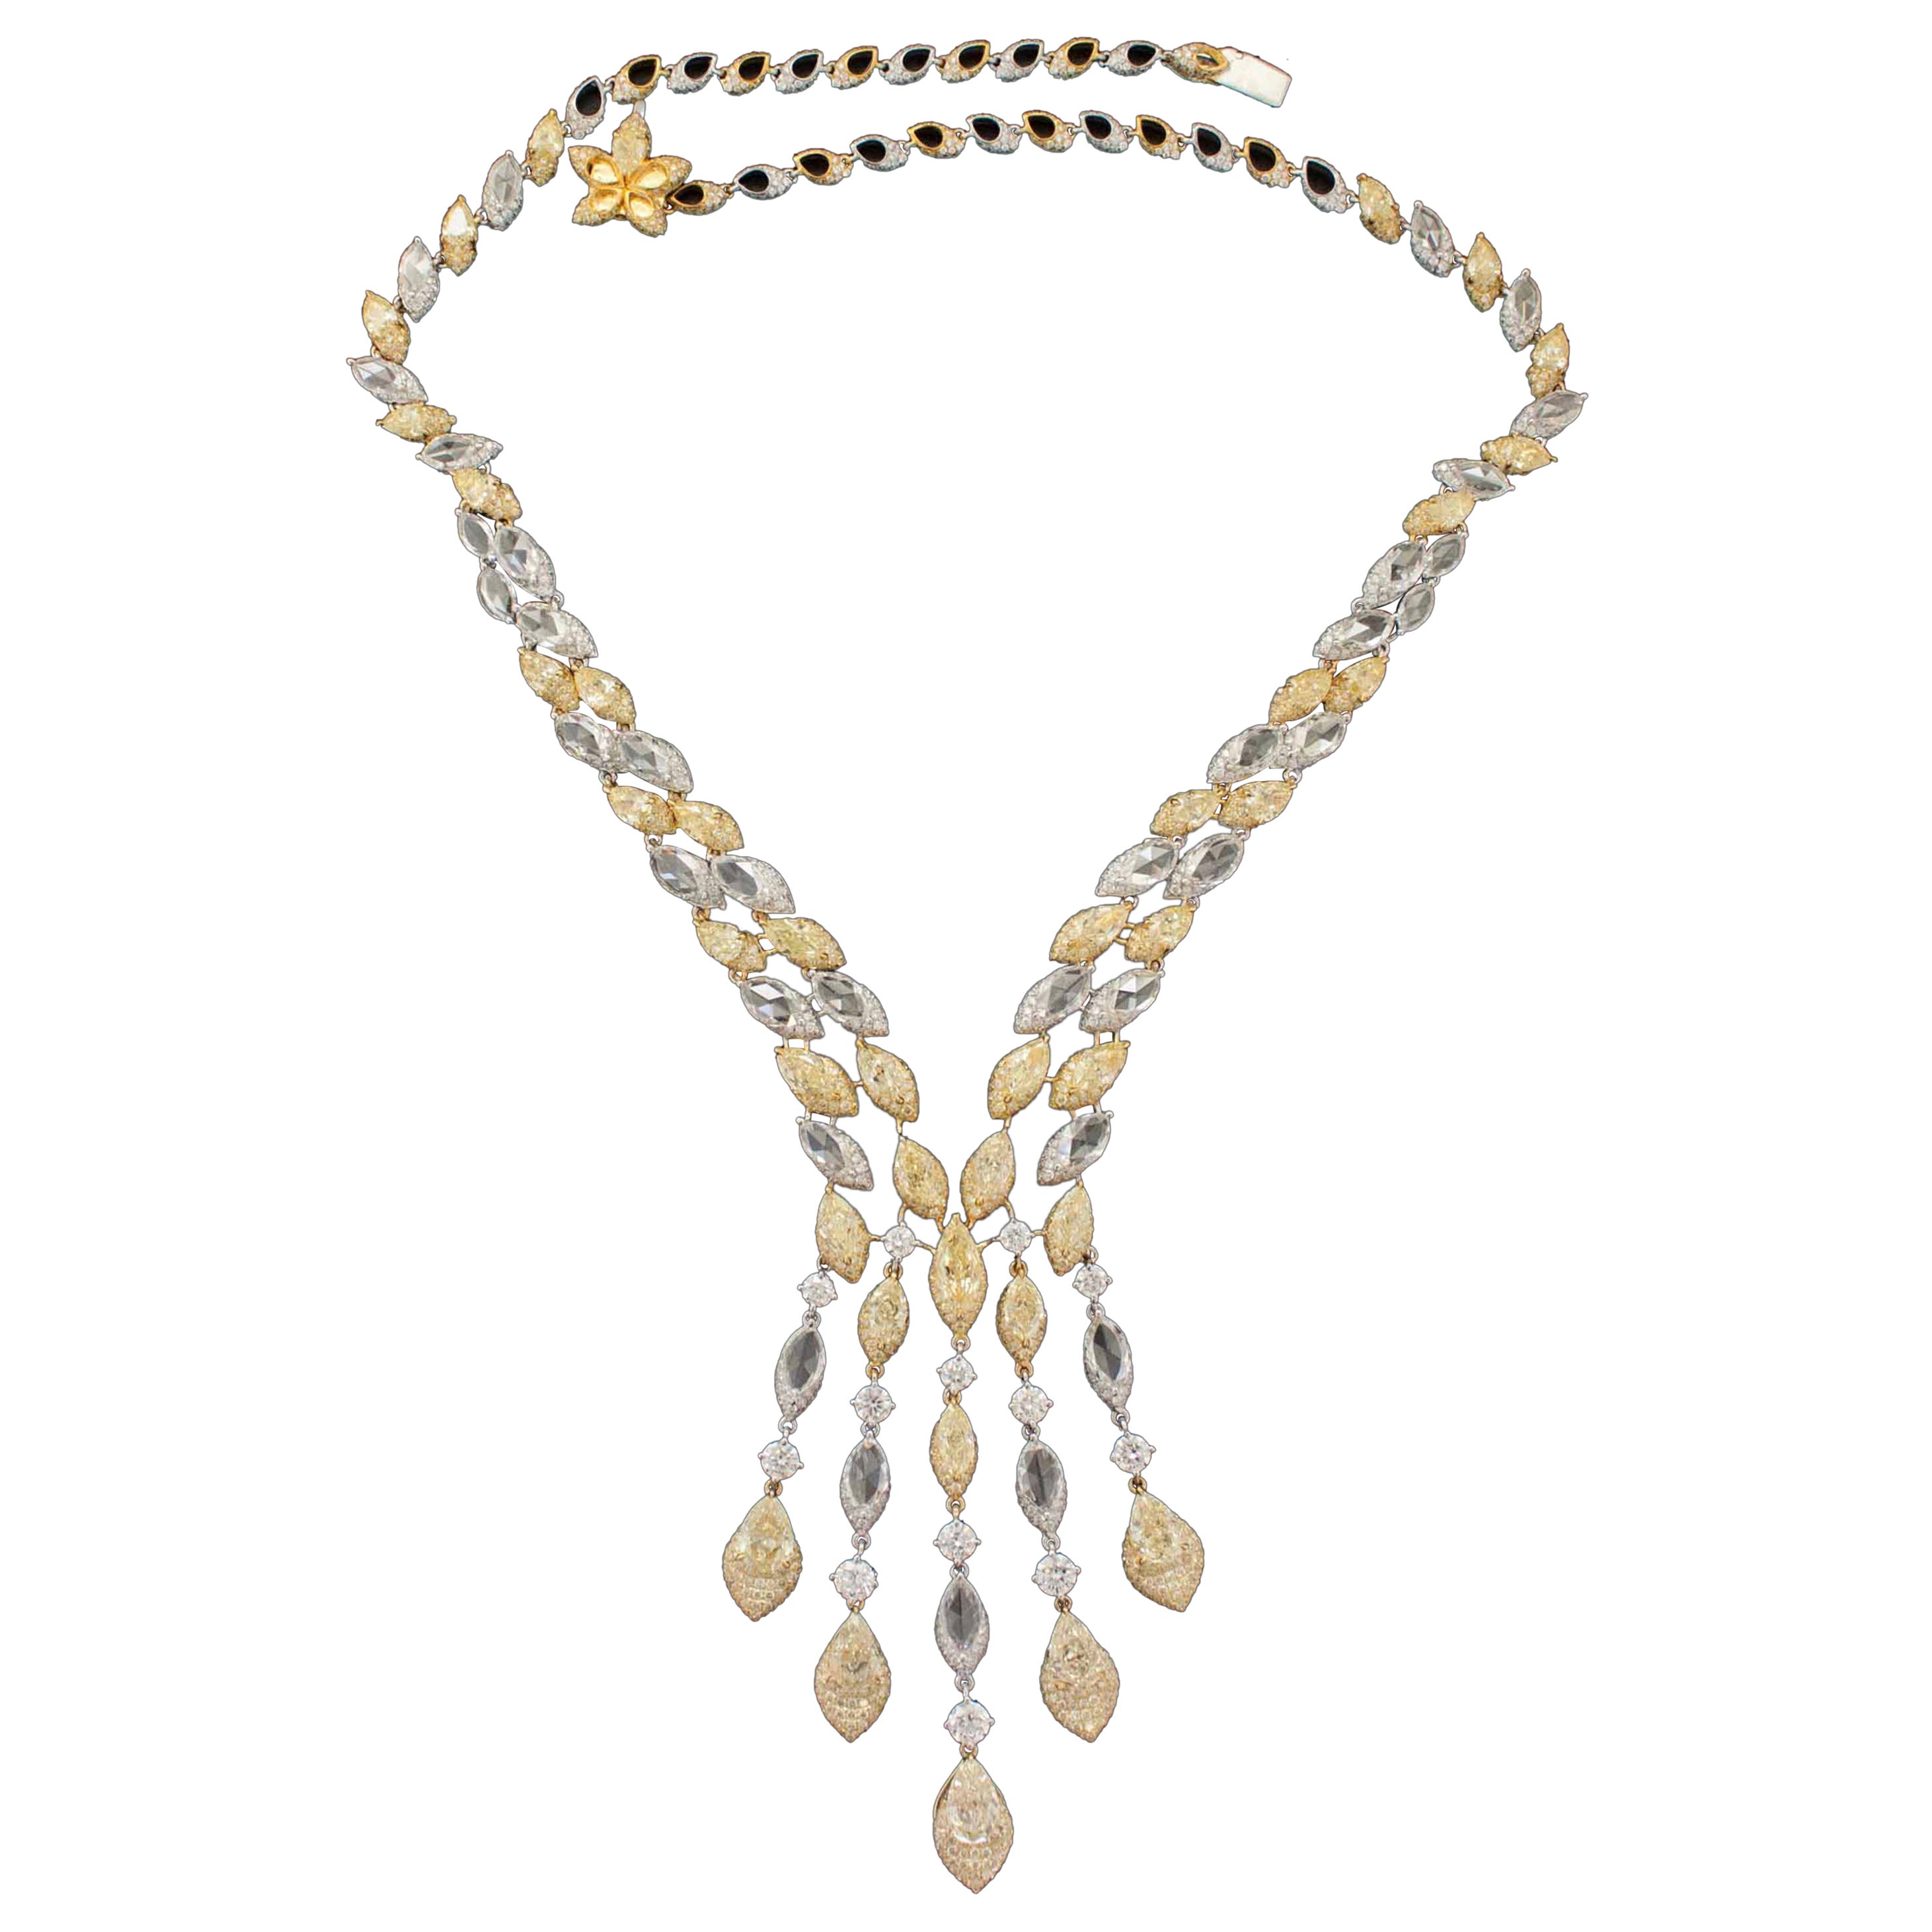 37.99 Carat Yellow and White Diamonds Necklace, 18K Yellow Gold